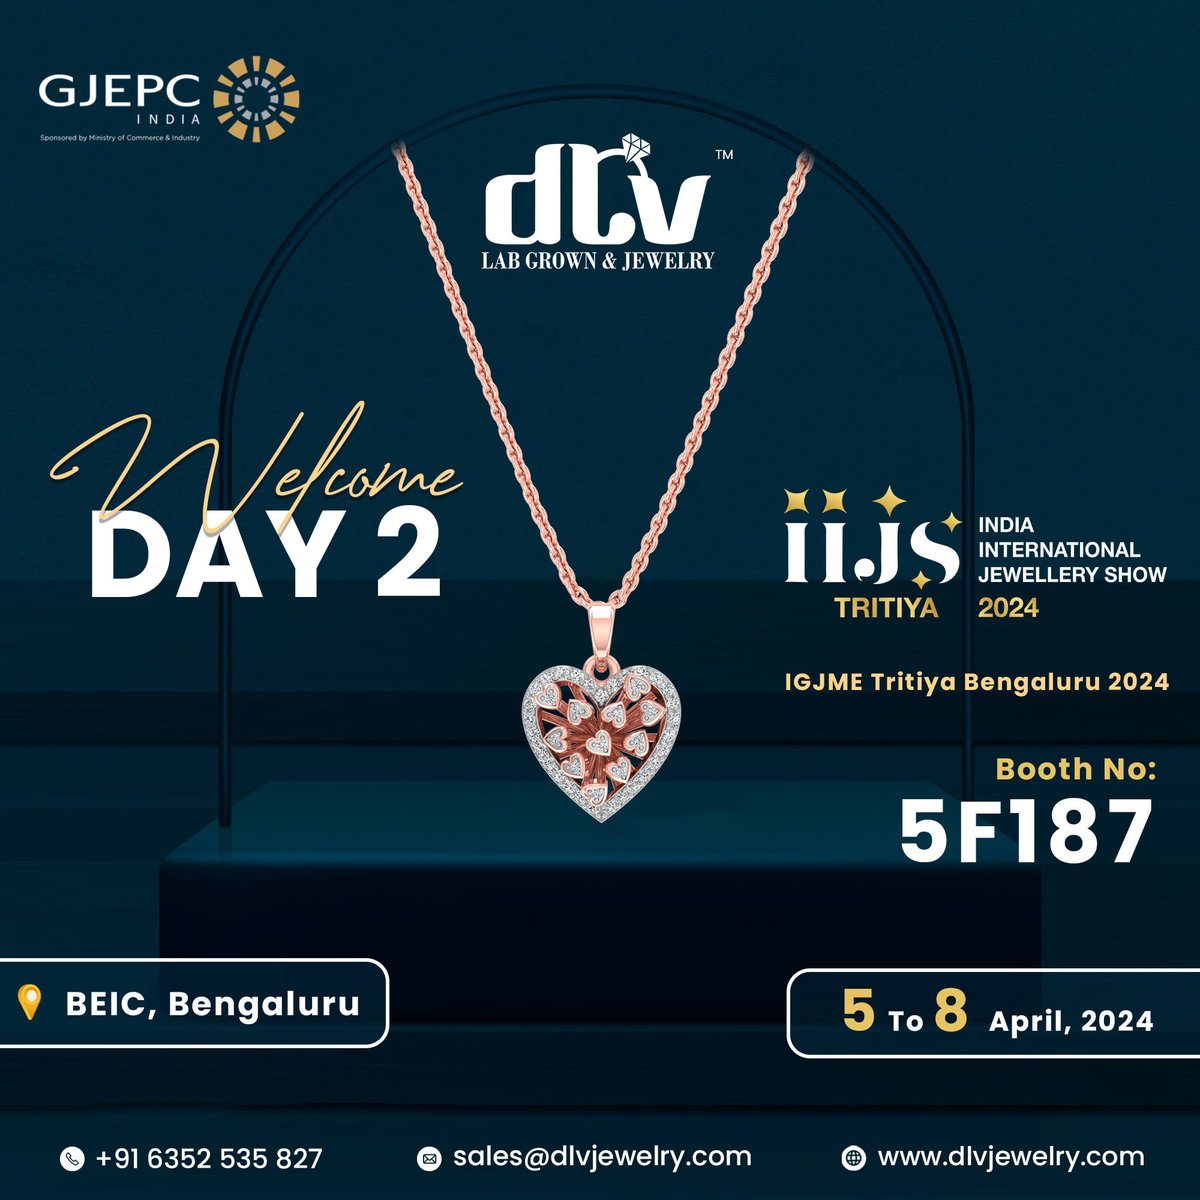 The perfact way to make any outfit look special..😎💗

Diamond 💎
Dlvjewelry 💝
Heart design ❤️
Chain necklace 🔥
_
_

dlvjewelry.com 🛍️
devlabtechventure.com 🎁

#dlvdiamondusa #usajewelry #necklace #specialperson #designerofusa #jewelleryaddict #jewllerydesign